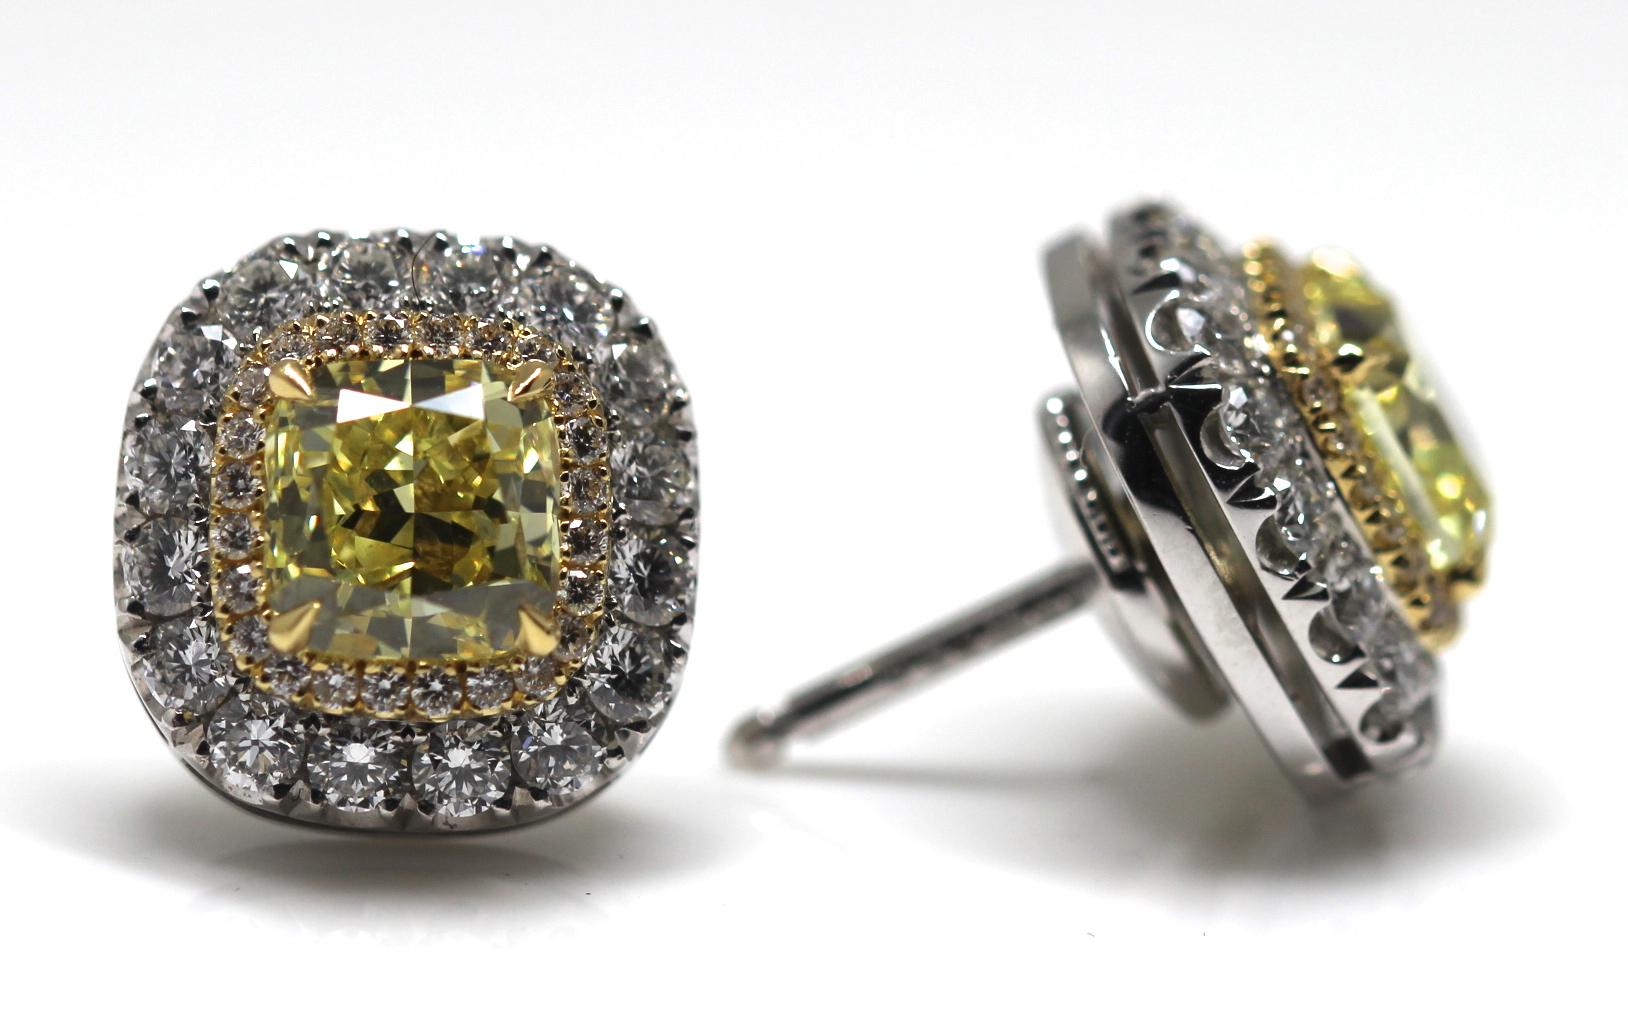 These GIA certified handmade diamond earrings are Fancy Intense Yellow with even colour throughout. One is round cornered modified brilliant weighing 1.11 carats VS 1 Clarity the other is 1.23 Carats VVS1 clarity this is a cushion modified brilliant